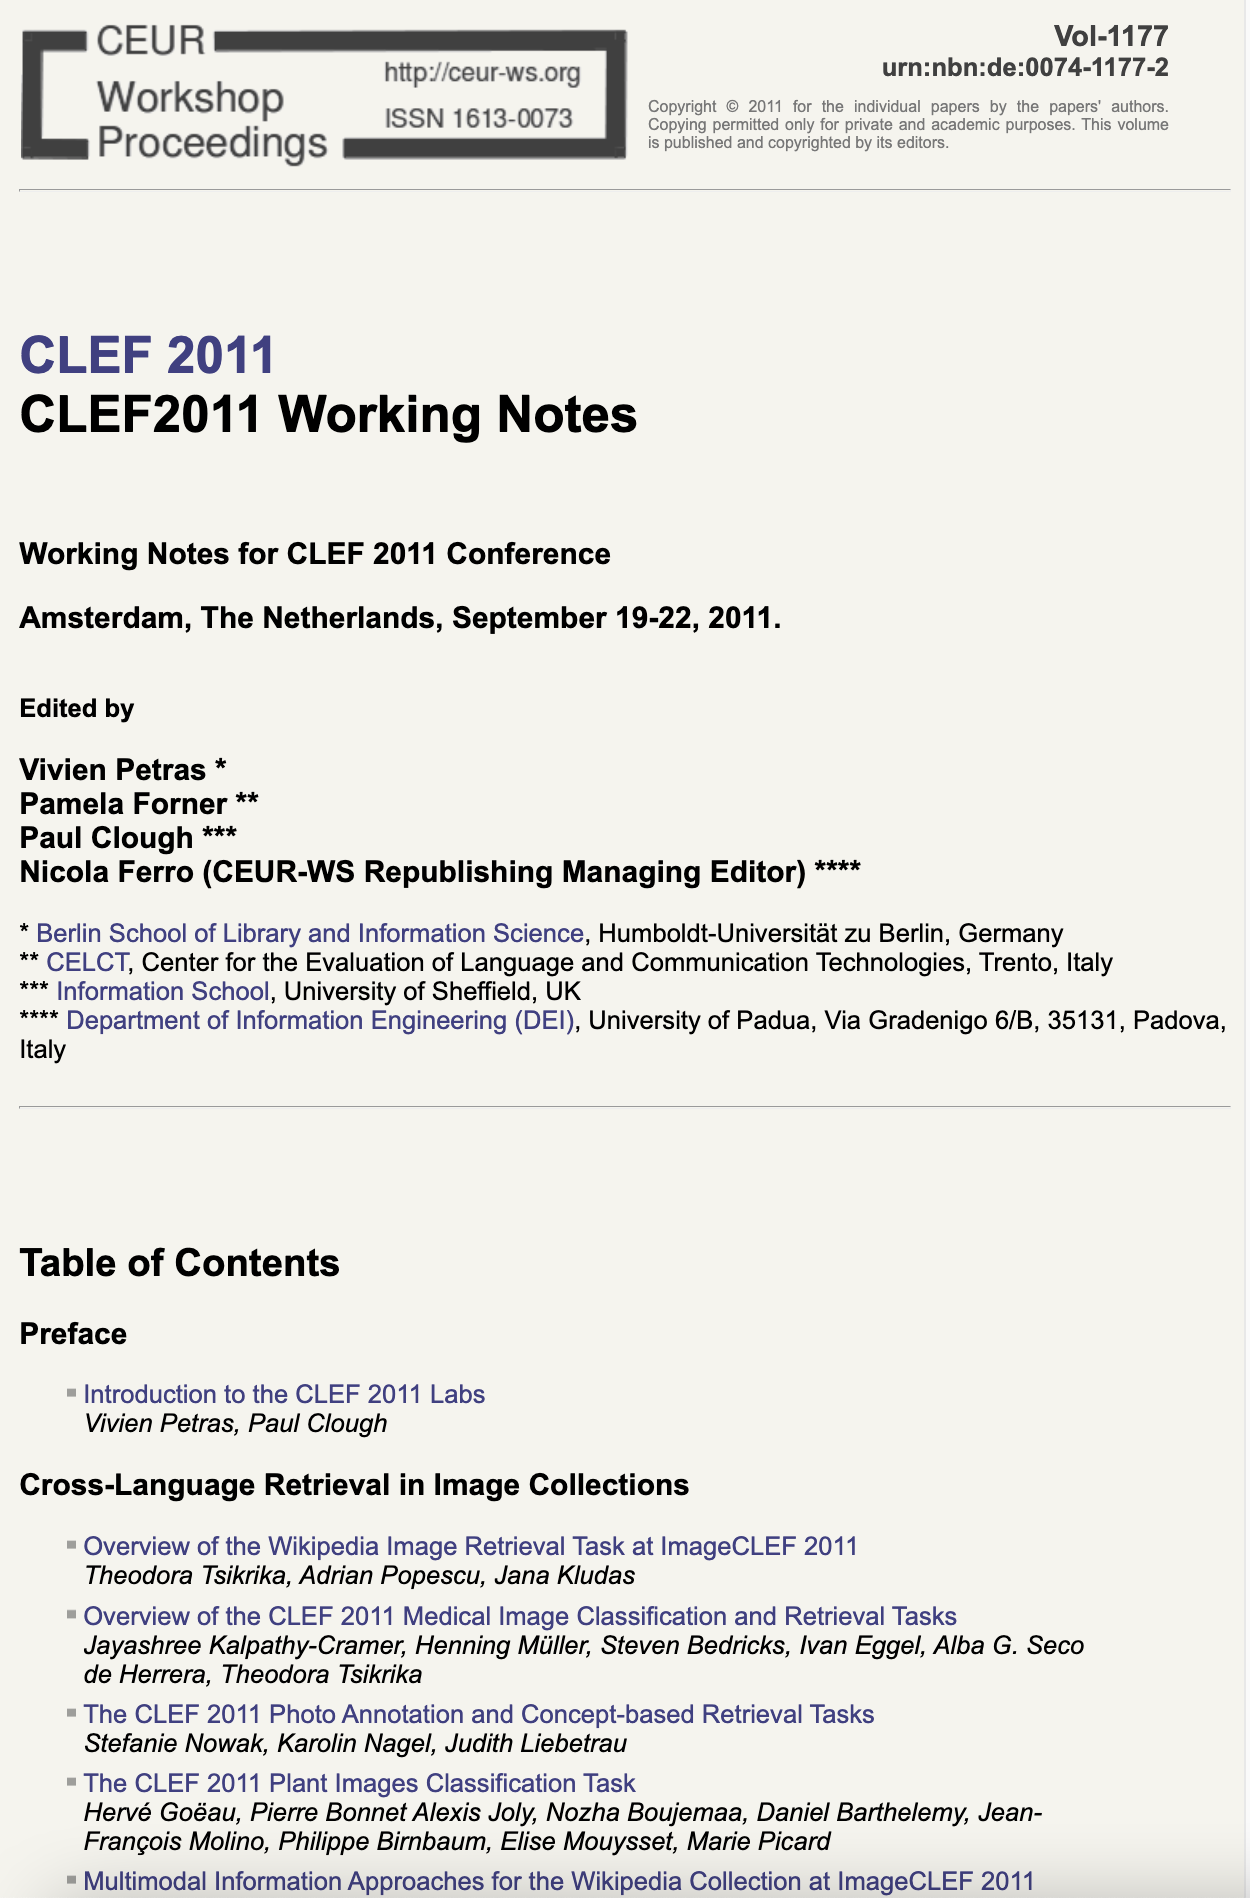 CLEF 2011 CEUR-WS Working Notes page